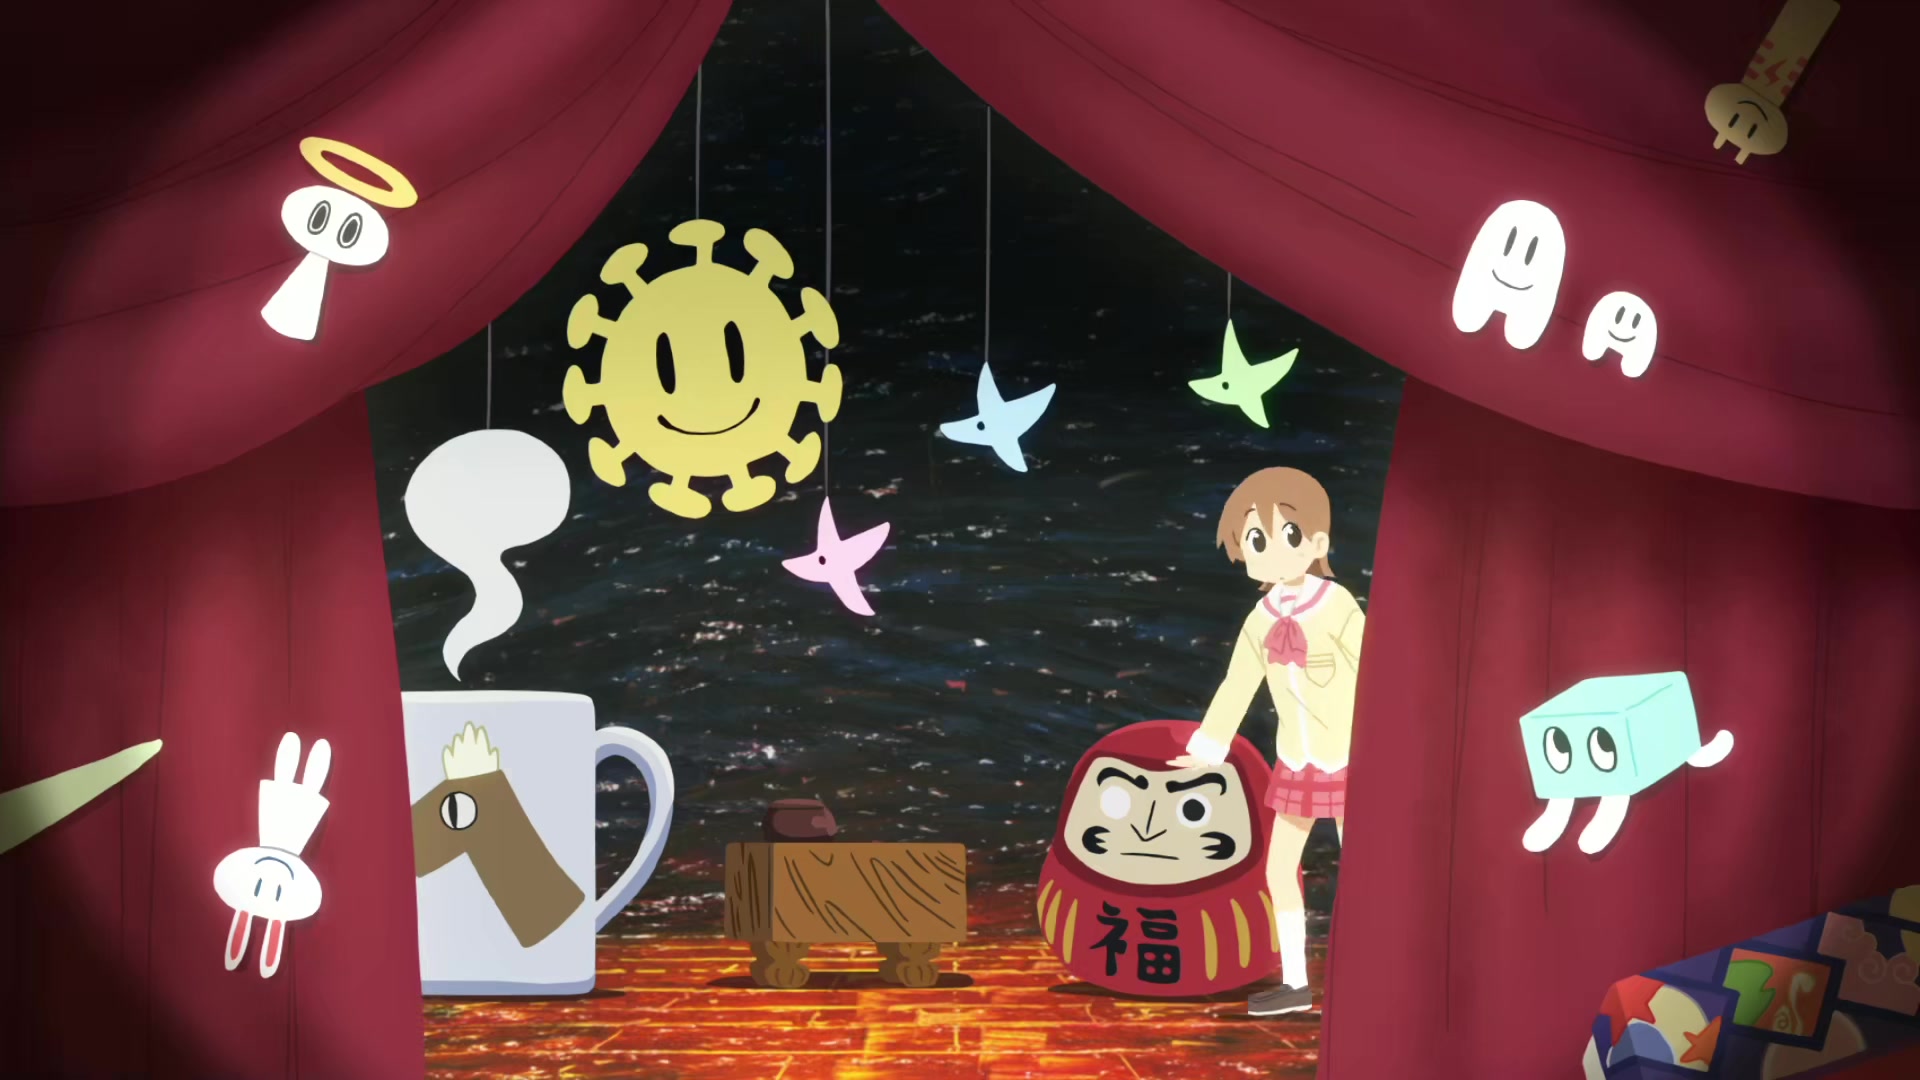 Footage from the ending animation; on a stage decorated with clip art, Yuuko, one of the main characters, peeks out hesitantly from behind the curtain.